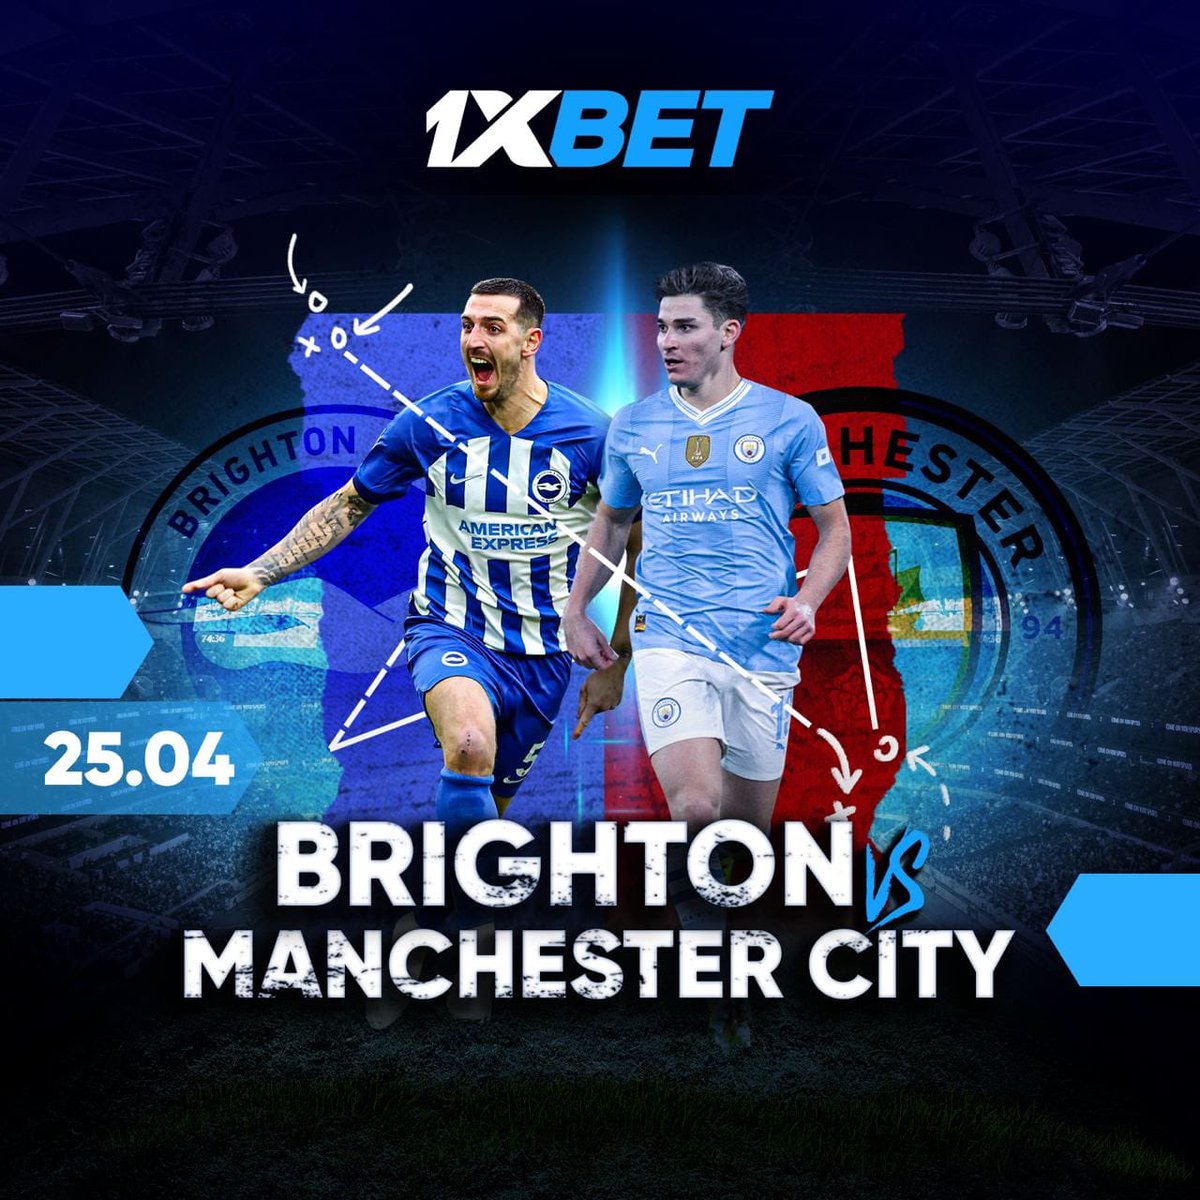 🏴󠁧󠁢󠁥󠁮󠁧󠁿 Will Brighton cause problems for City? Will De Zerbi be able to make his mark in the championship race, or will injuries ru¡n Brighton plans? Bet on the favorites and earn with 1xBet! Sign up: tinyurl.com/ye22n4tk Promo Code: Pharaoh1x